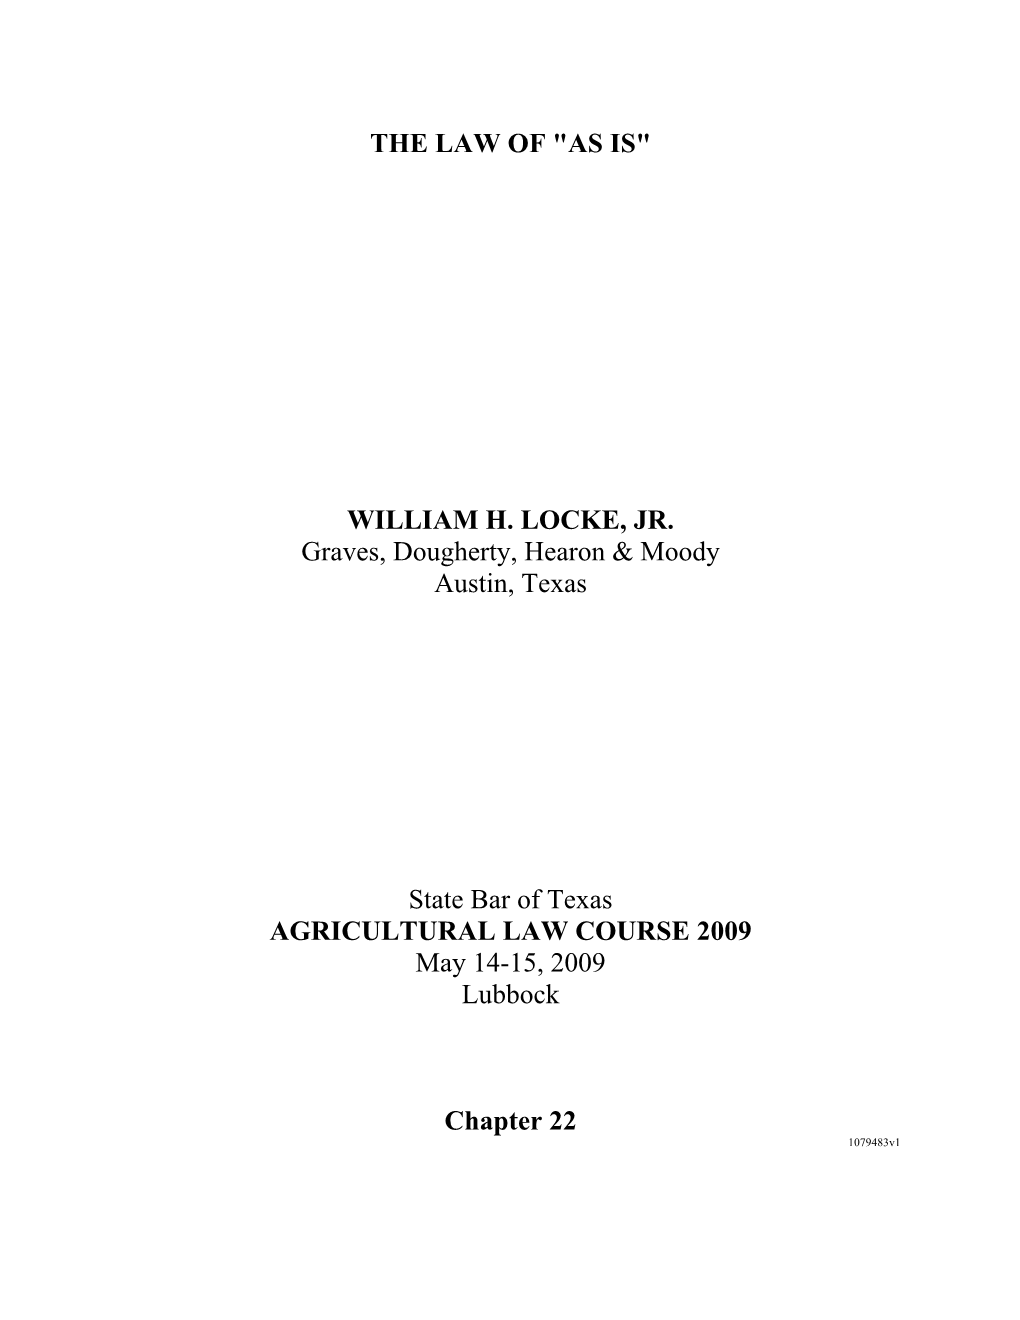 THE LAW of "AS IS" WILLIAM H. LOCKE, JR. Graves, Dougherty, Hearon & Moody Austin, Texas State Bar of Texas AGRICU